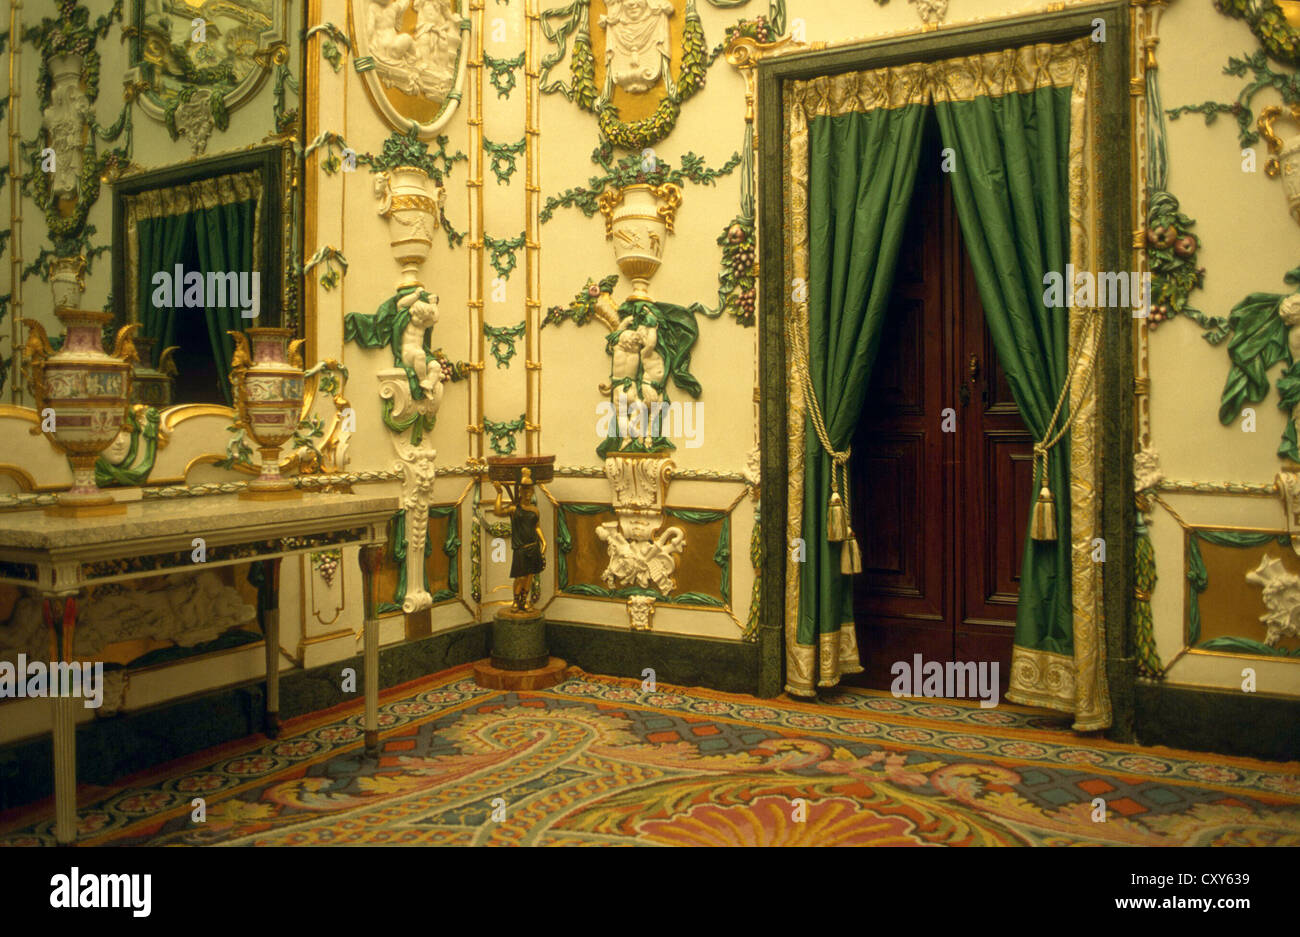 MADRID SPAIN - THE ROYAL PALACE- HIGHLY DECORATED INTERIOR Stock Photo